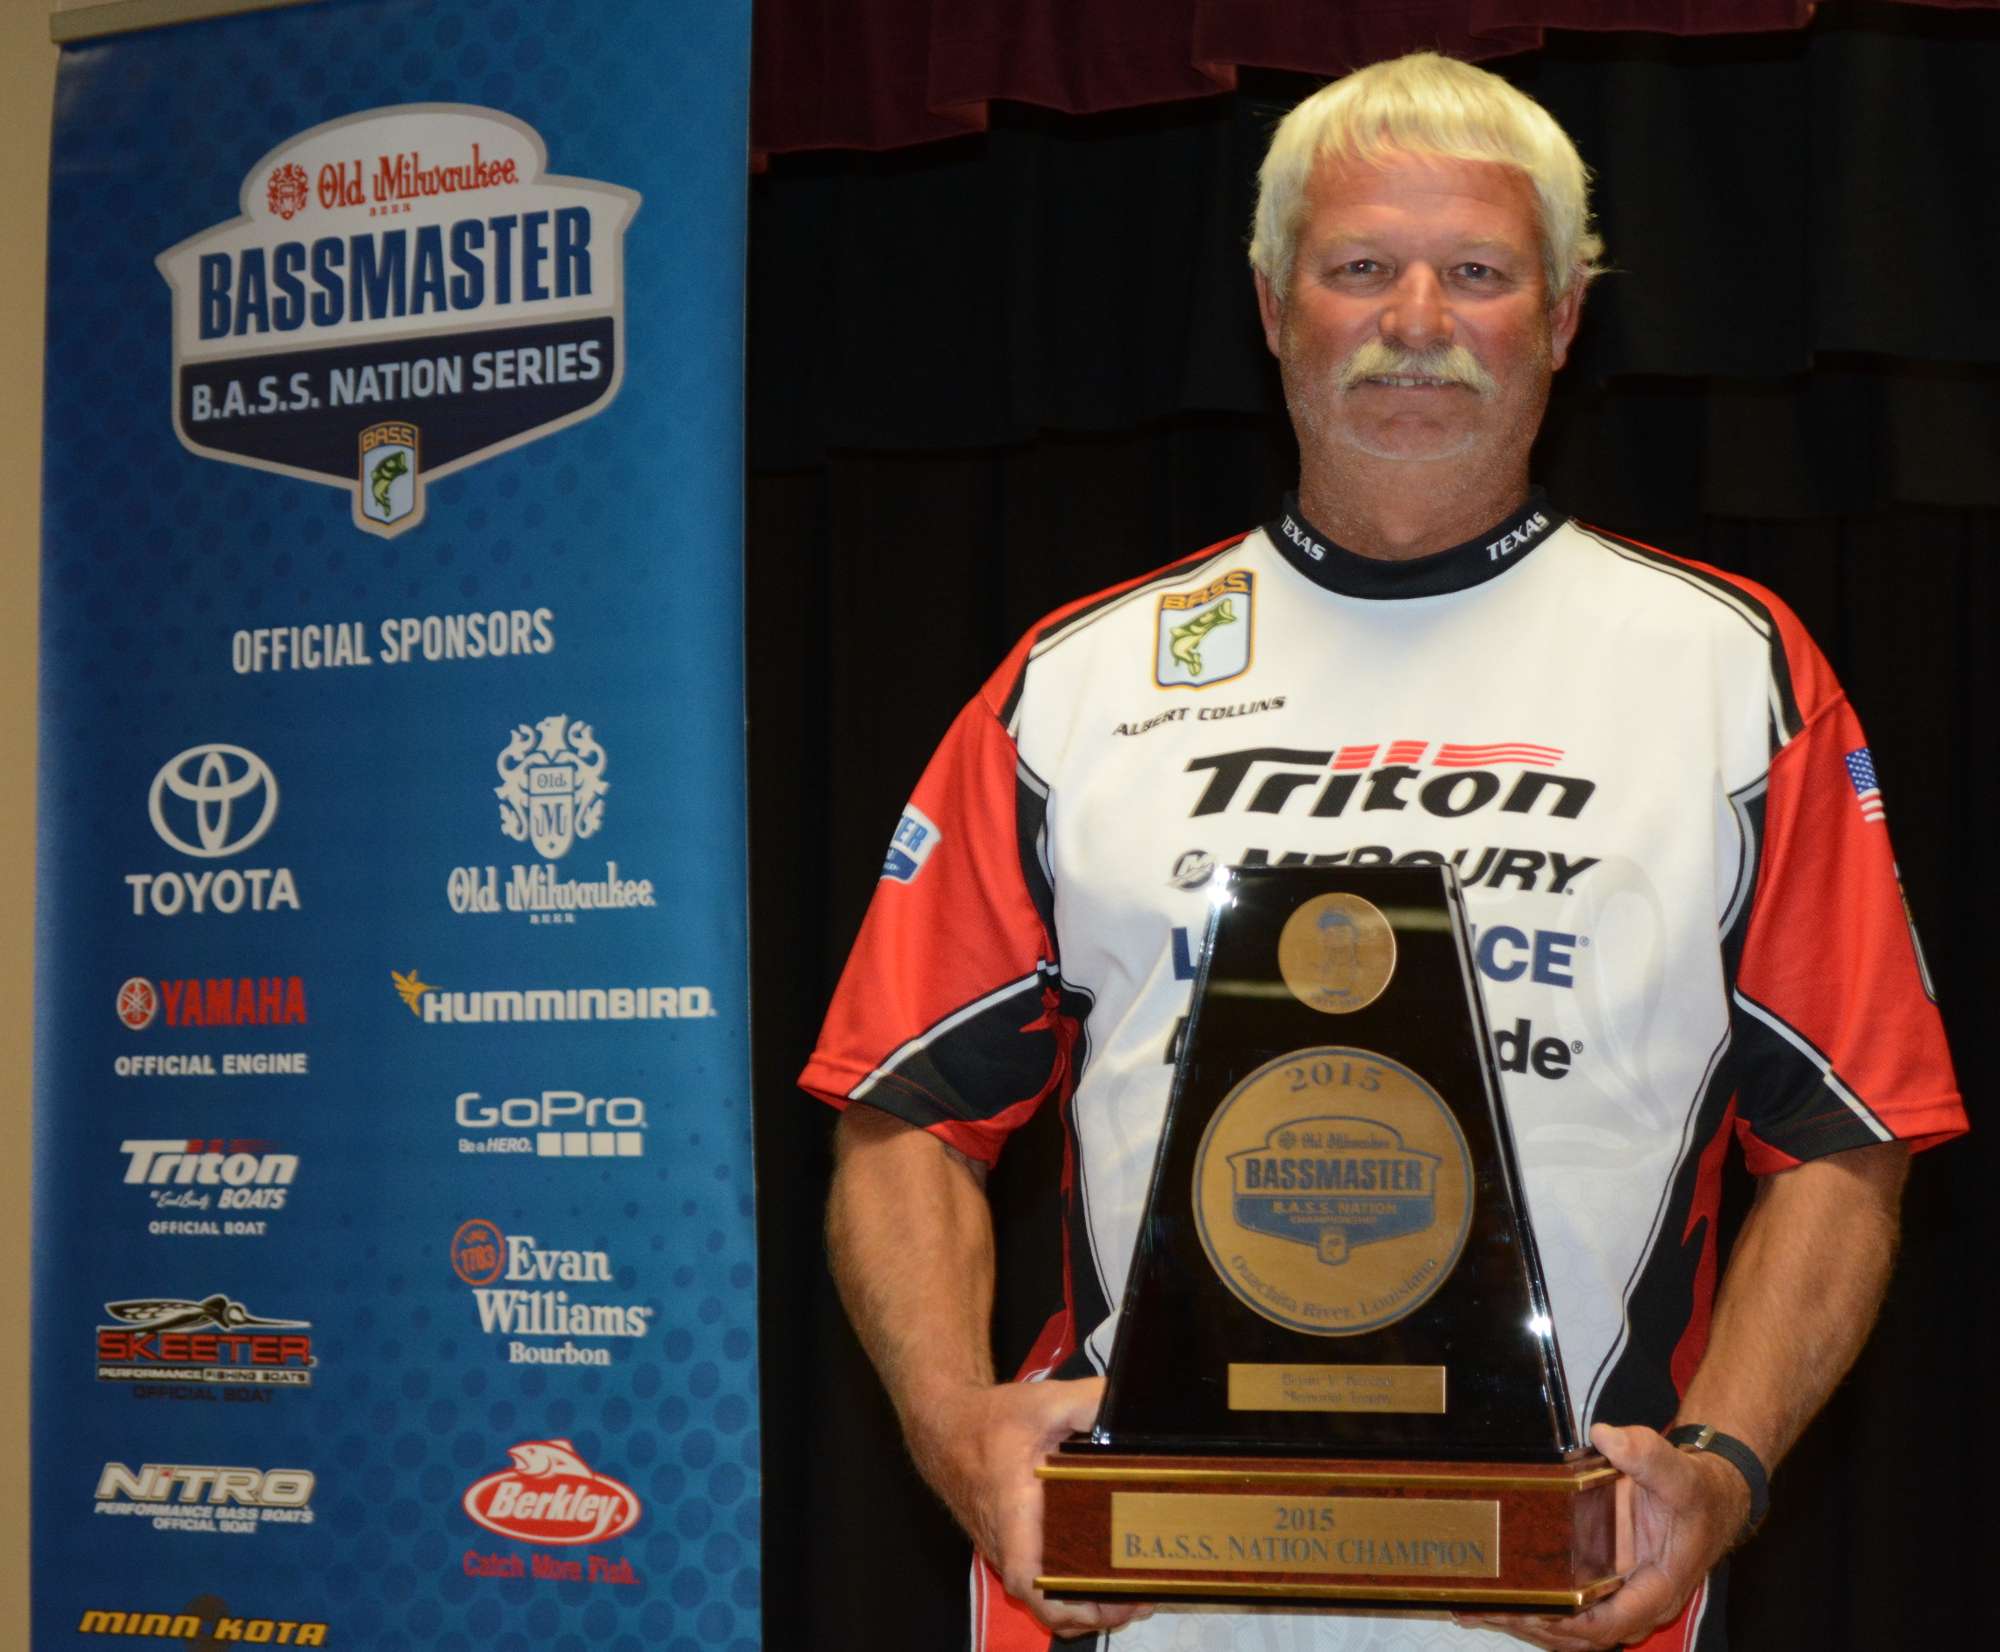 Collins has made it to the Classic once before, but it was through the Bassmaster Weekend Series.